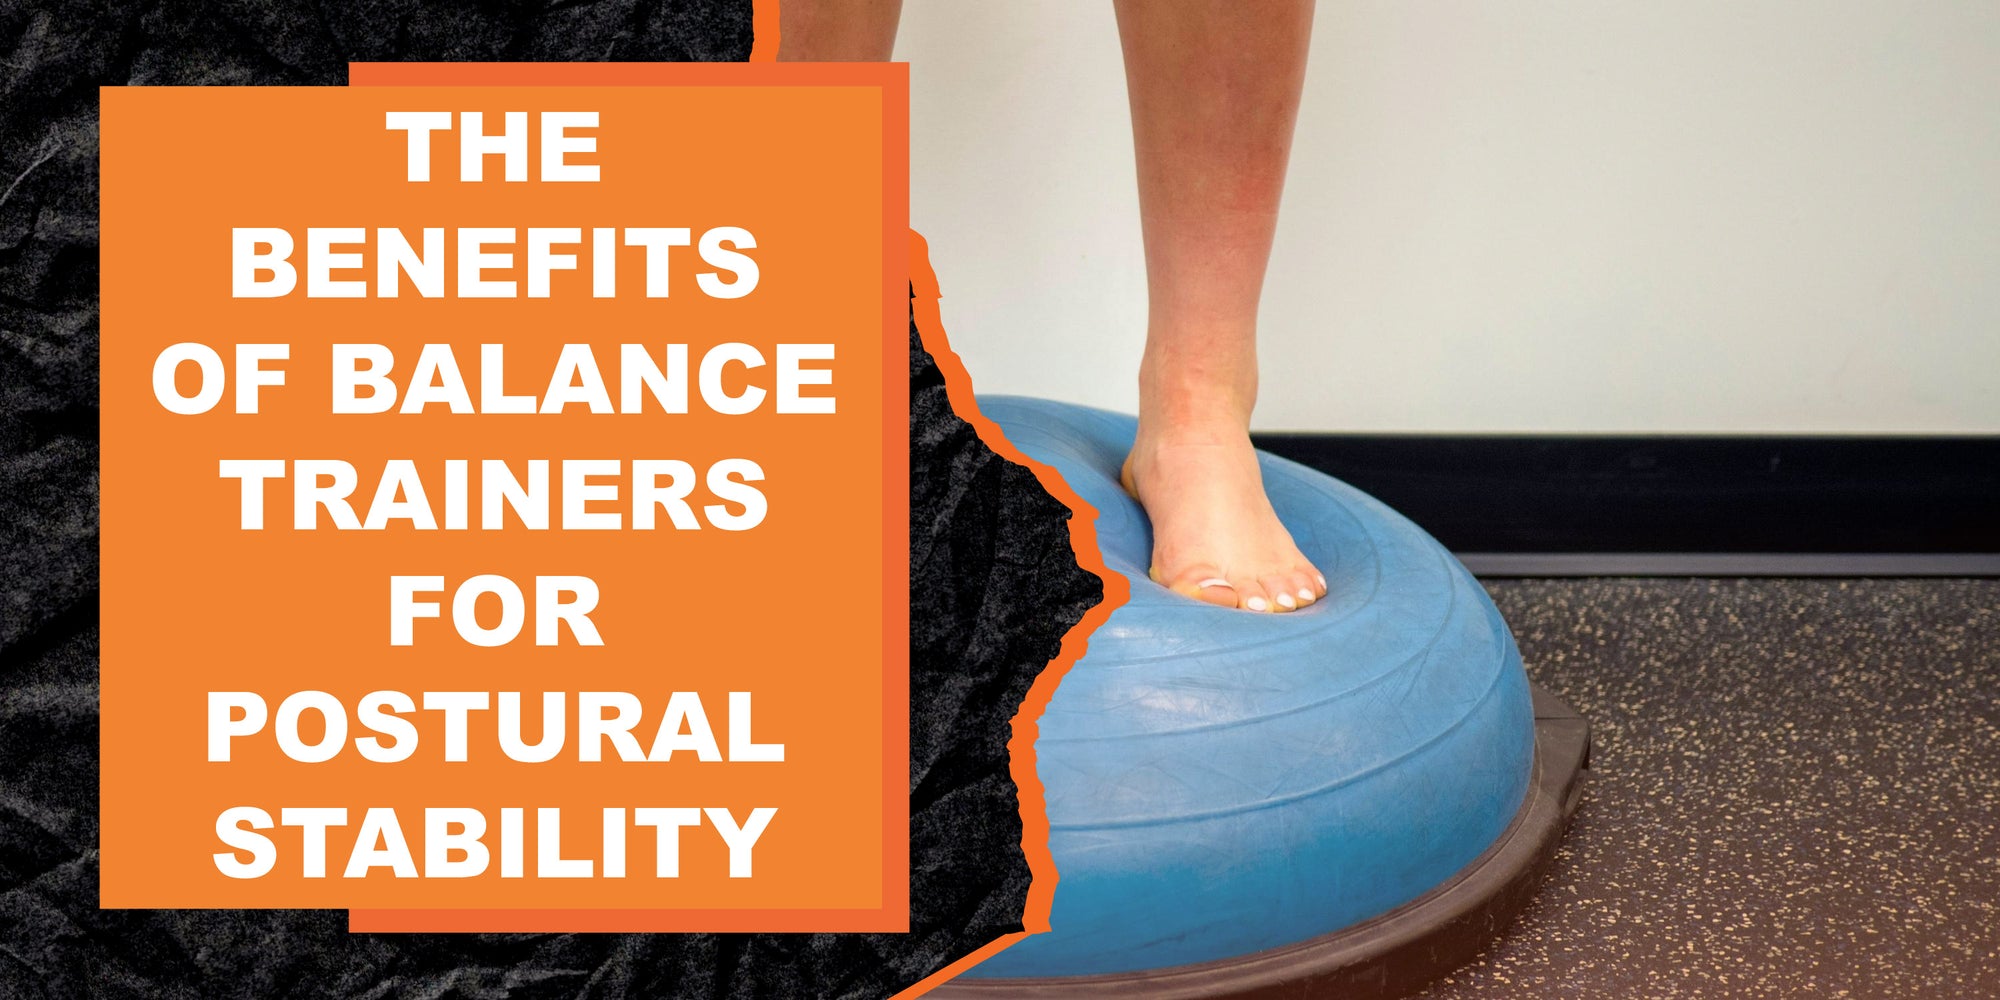 The Benefits of Balance Trainers for Postural Stability